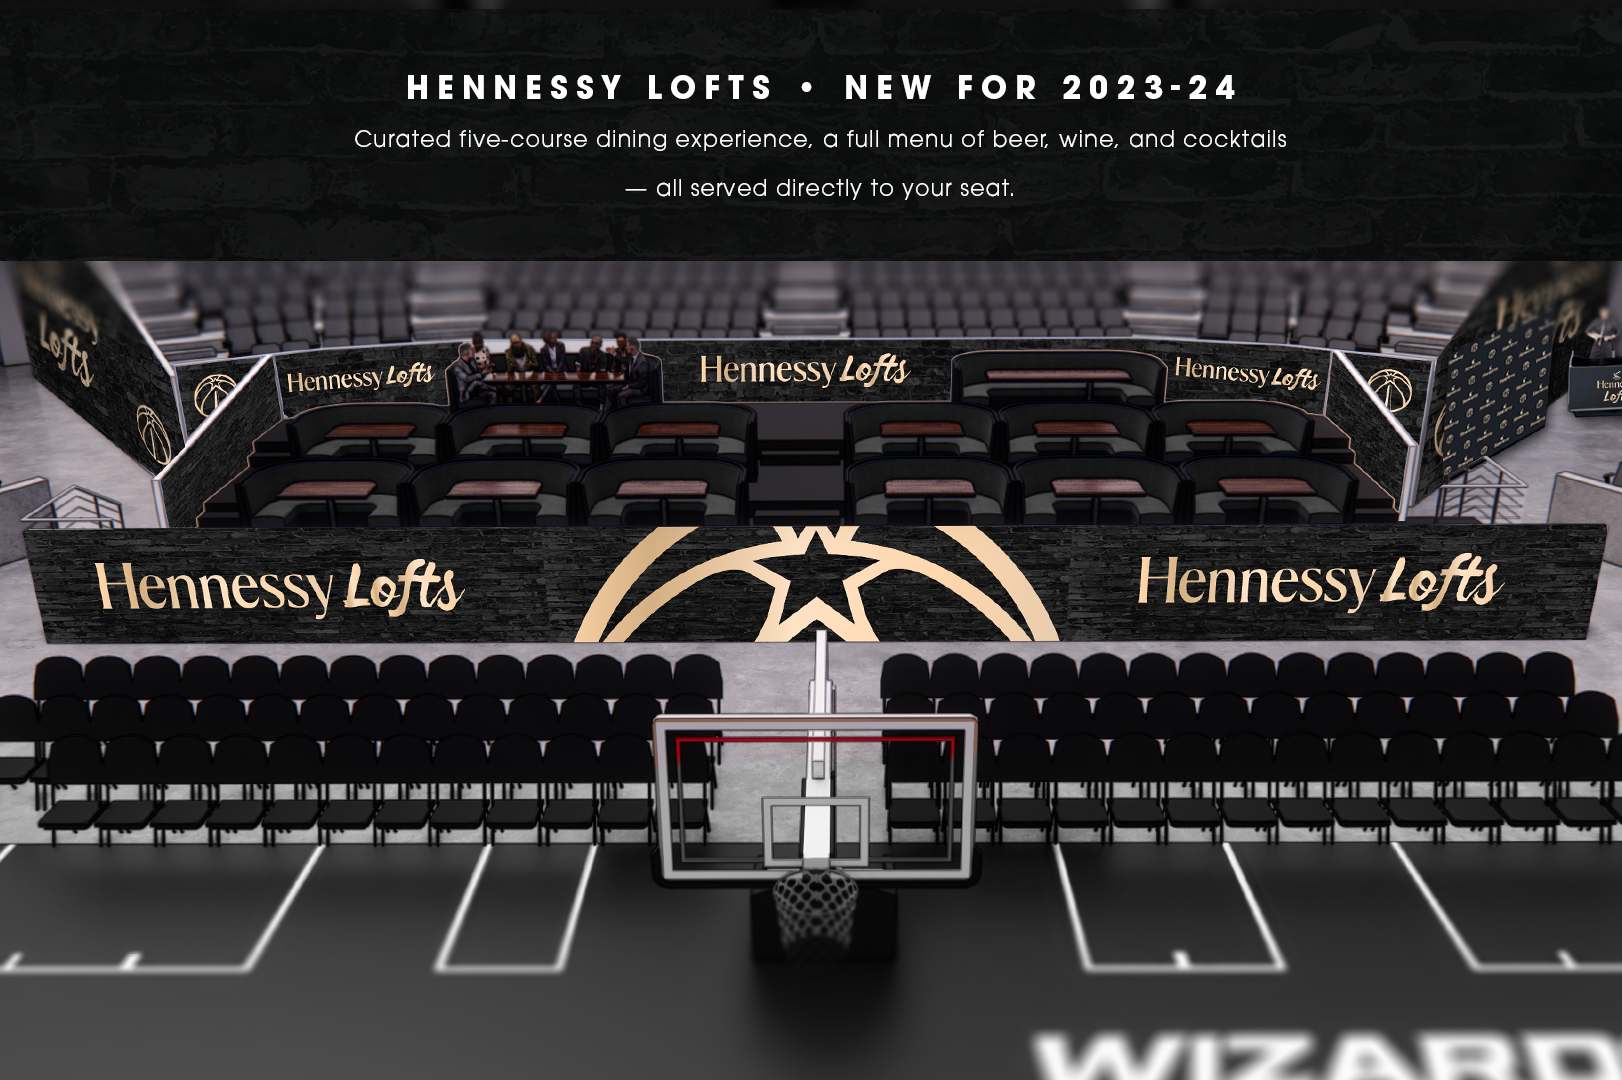 Renting a Hennessy loft for Wizards home games will cost you